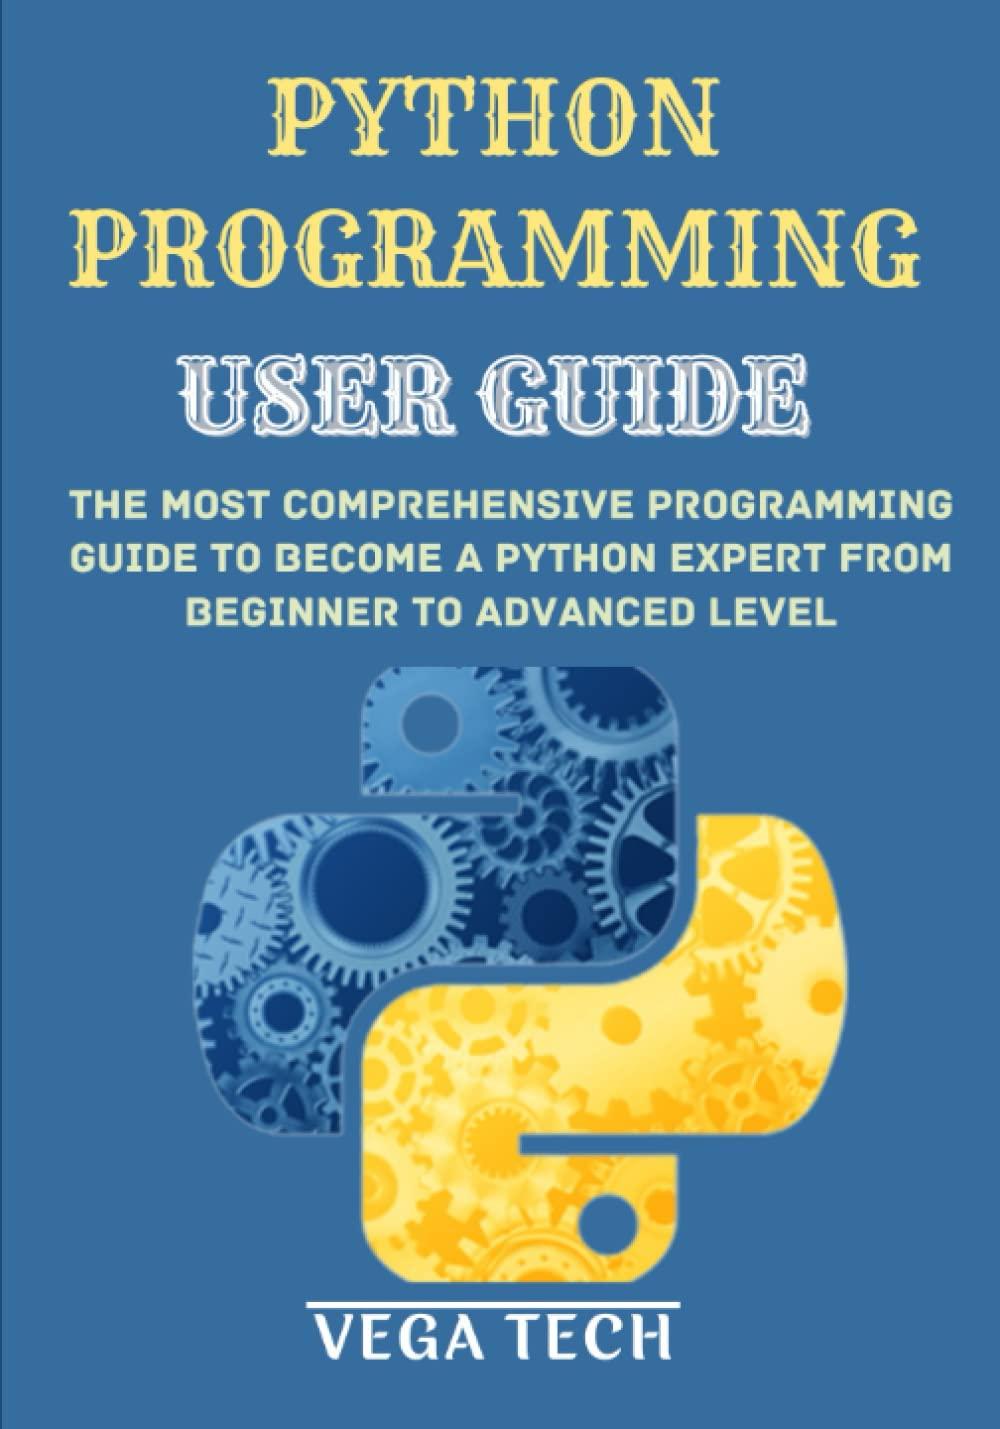 python programming user guide the most comprehensive programming guide to become a python expert from